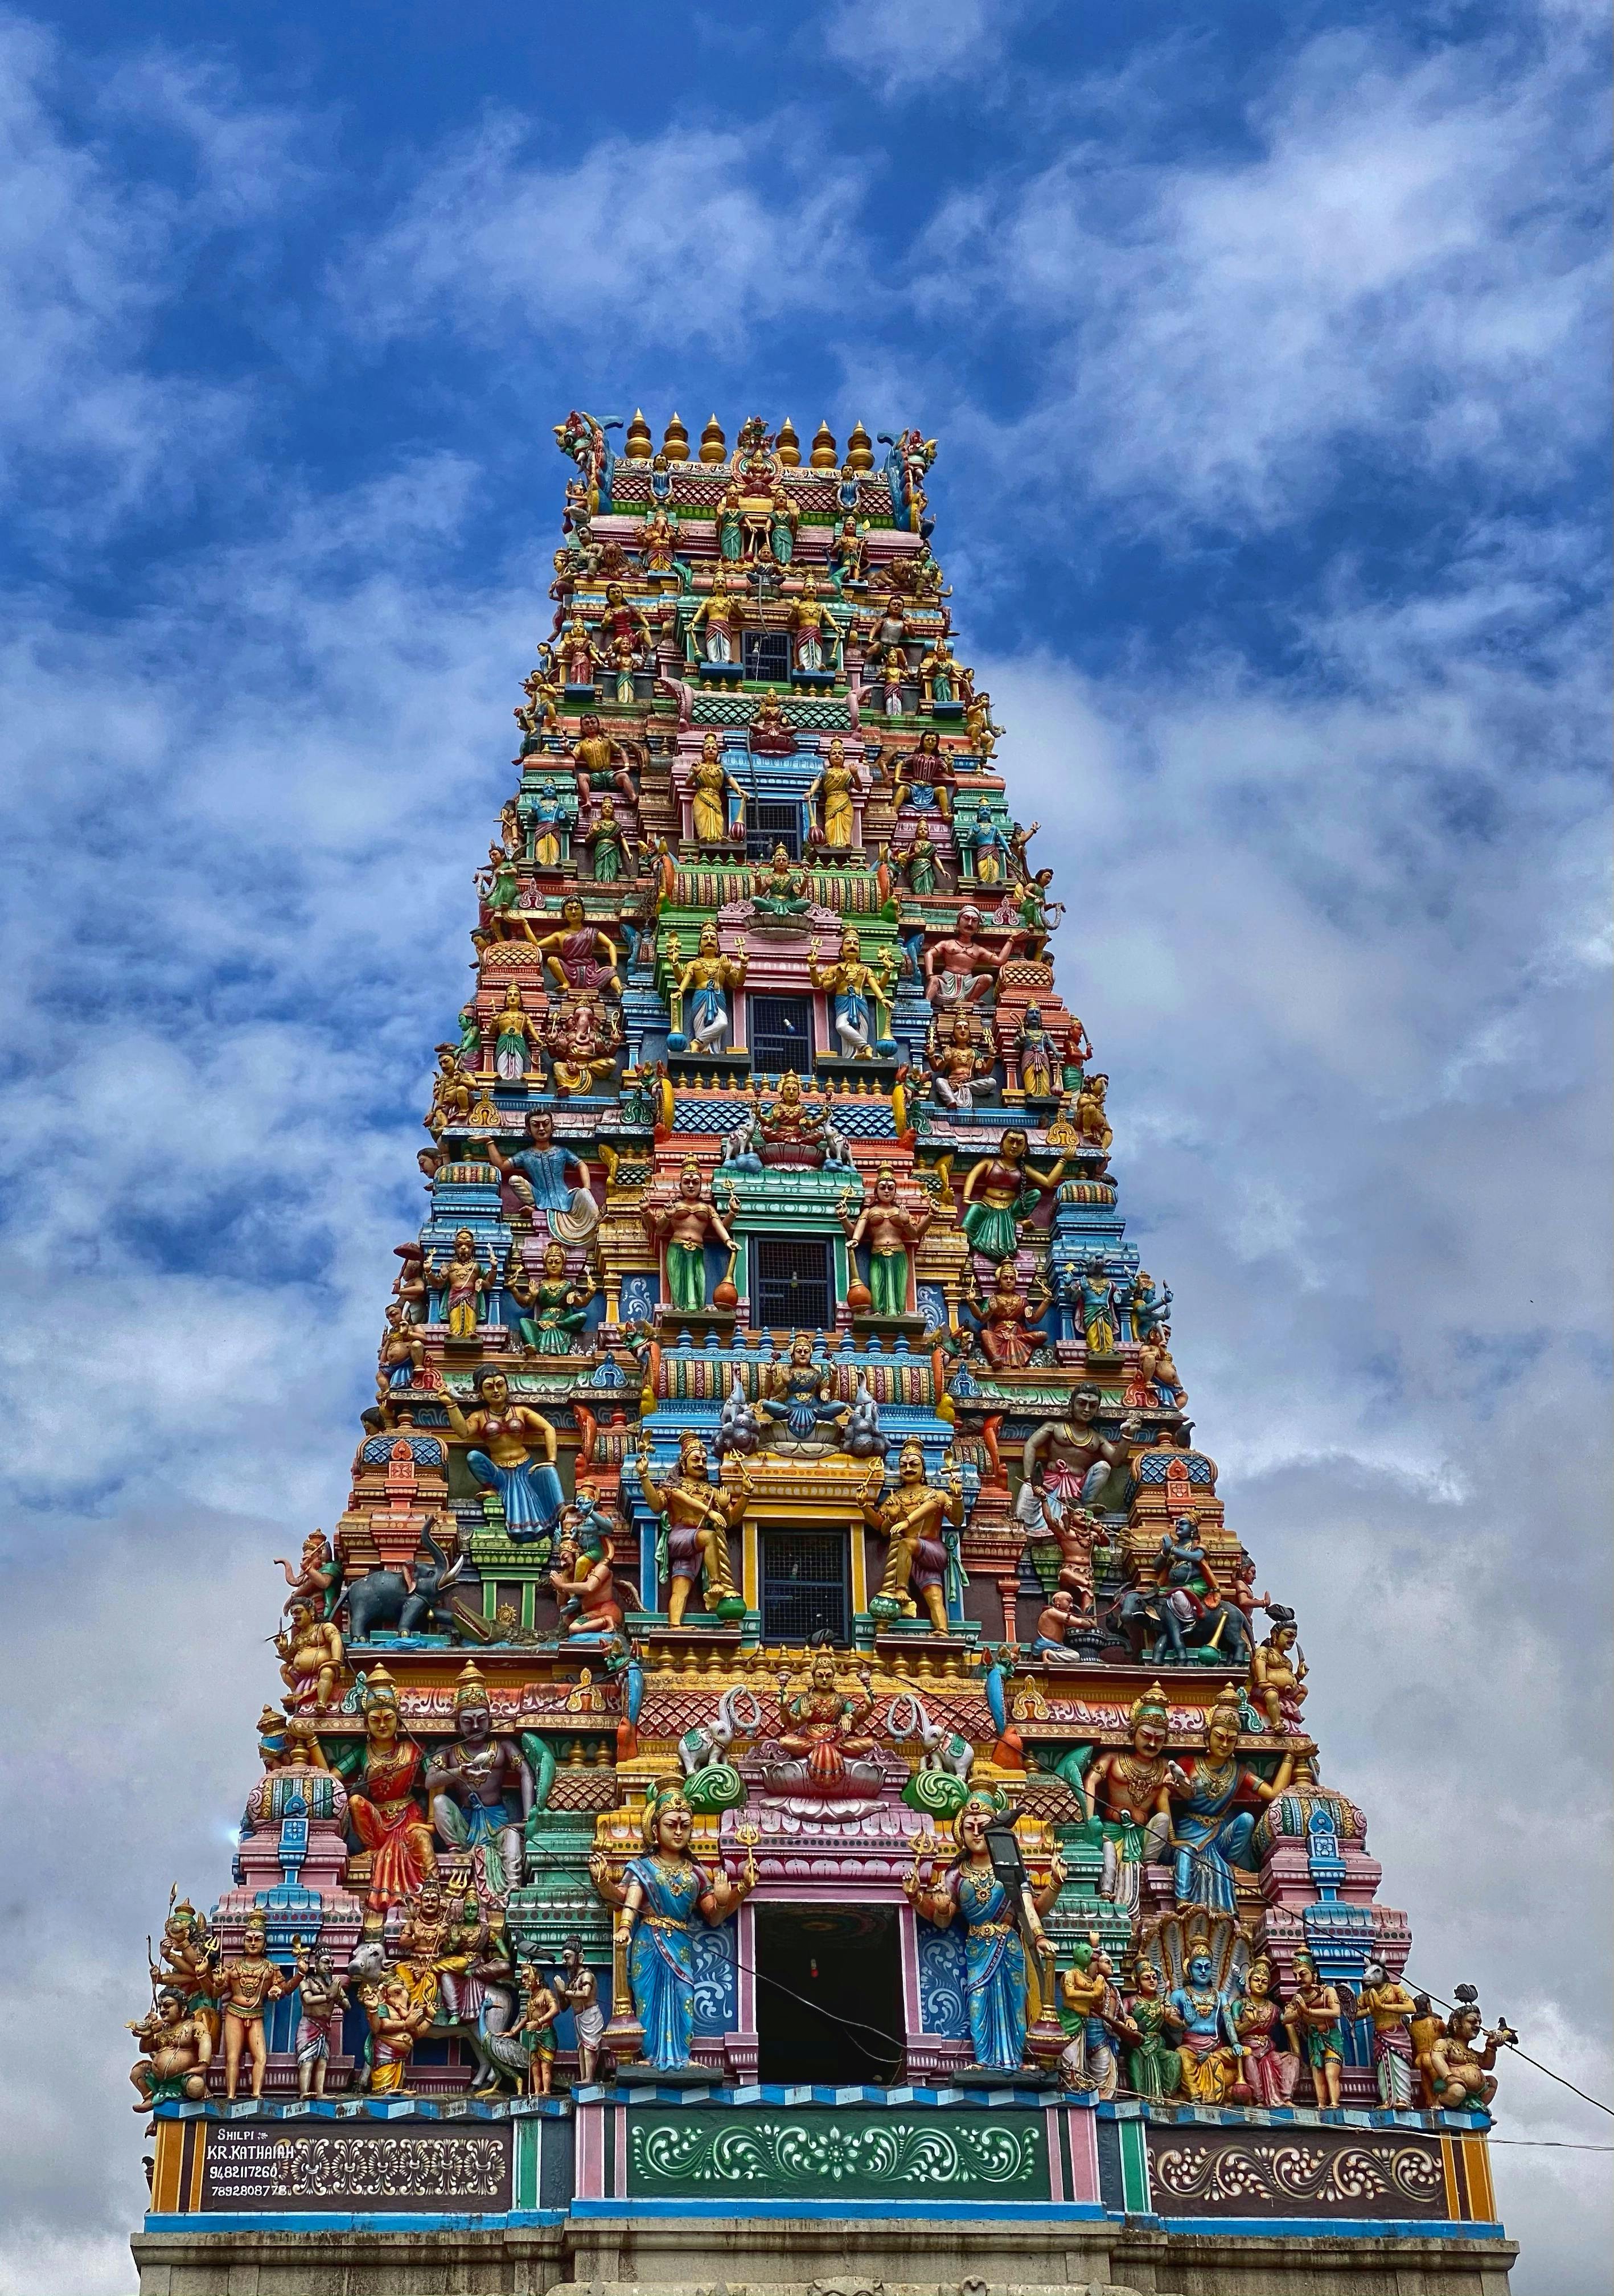 Temple Photos, Download The BEST Free Temple Stock Photos & HD Images